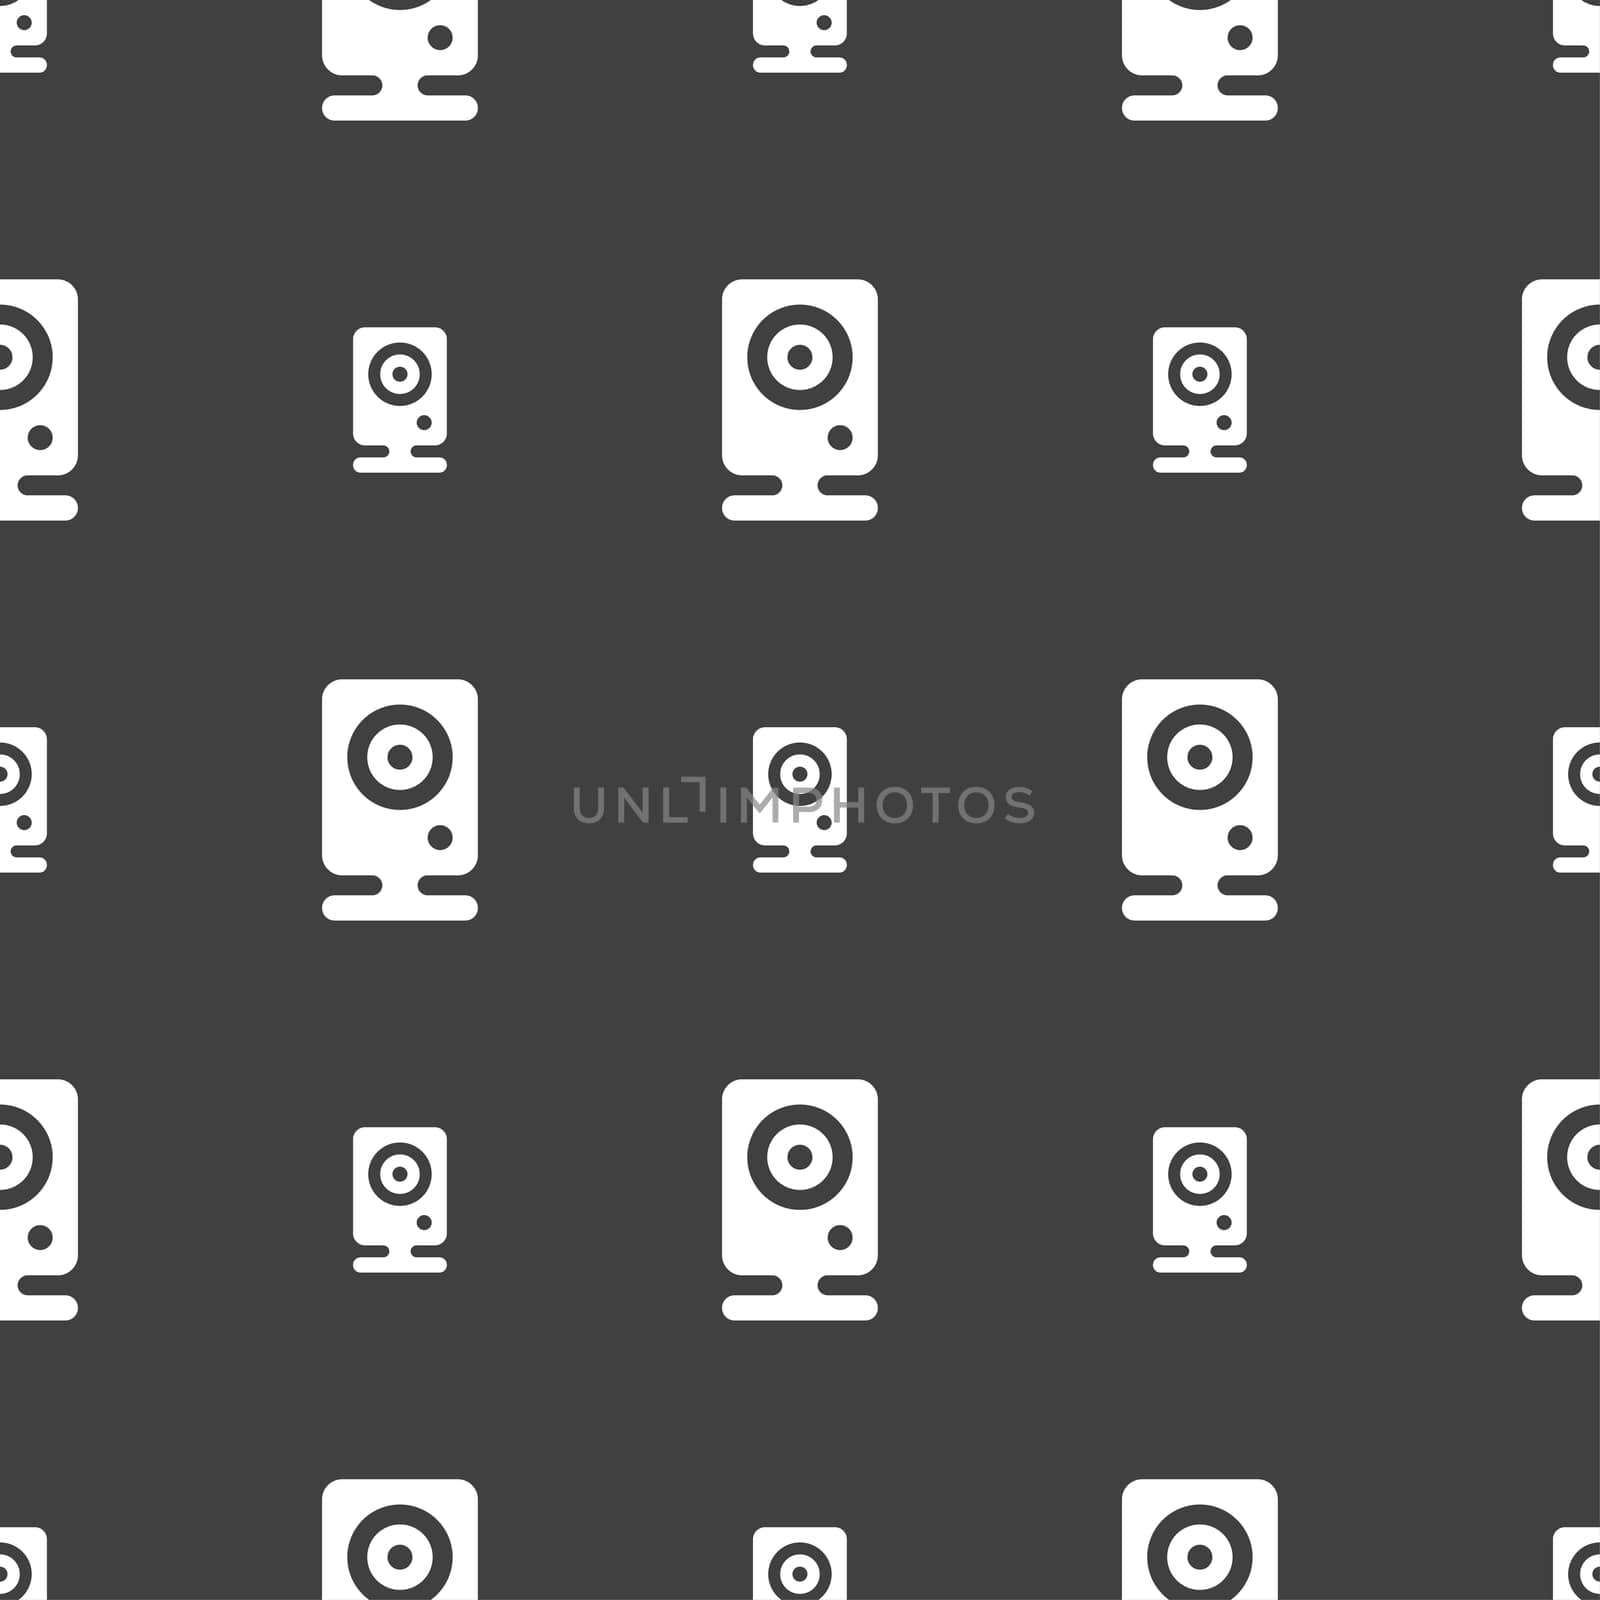 Web cam icon sign. Seamless pattern on a gray background. illustration